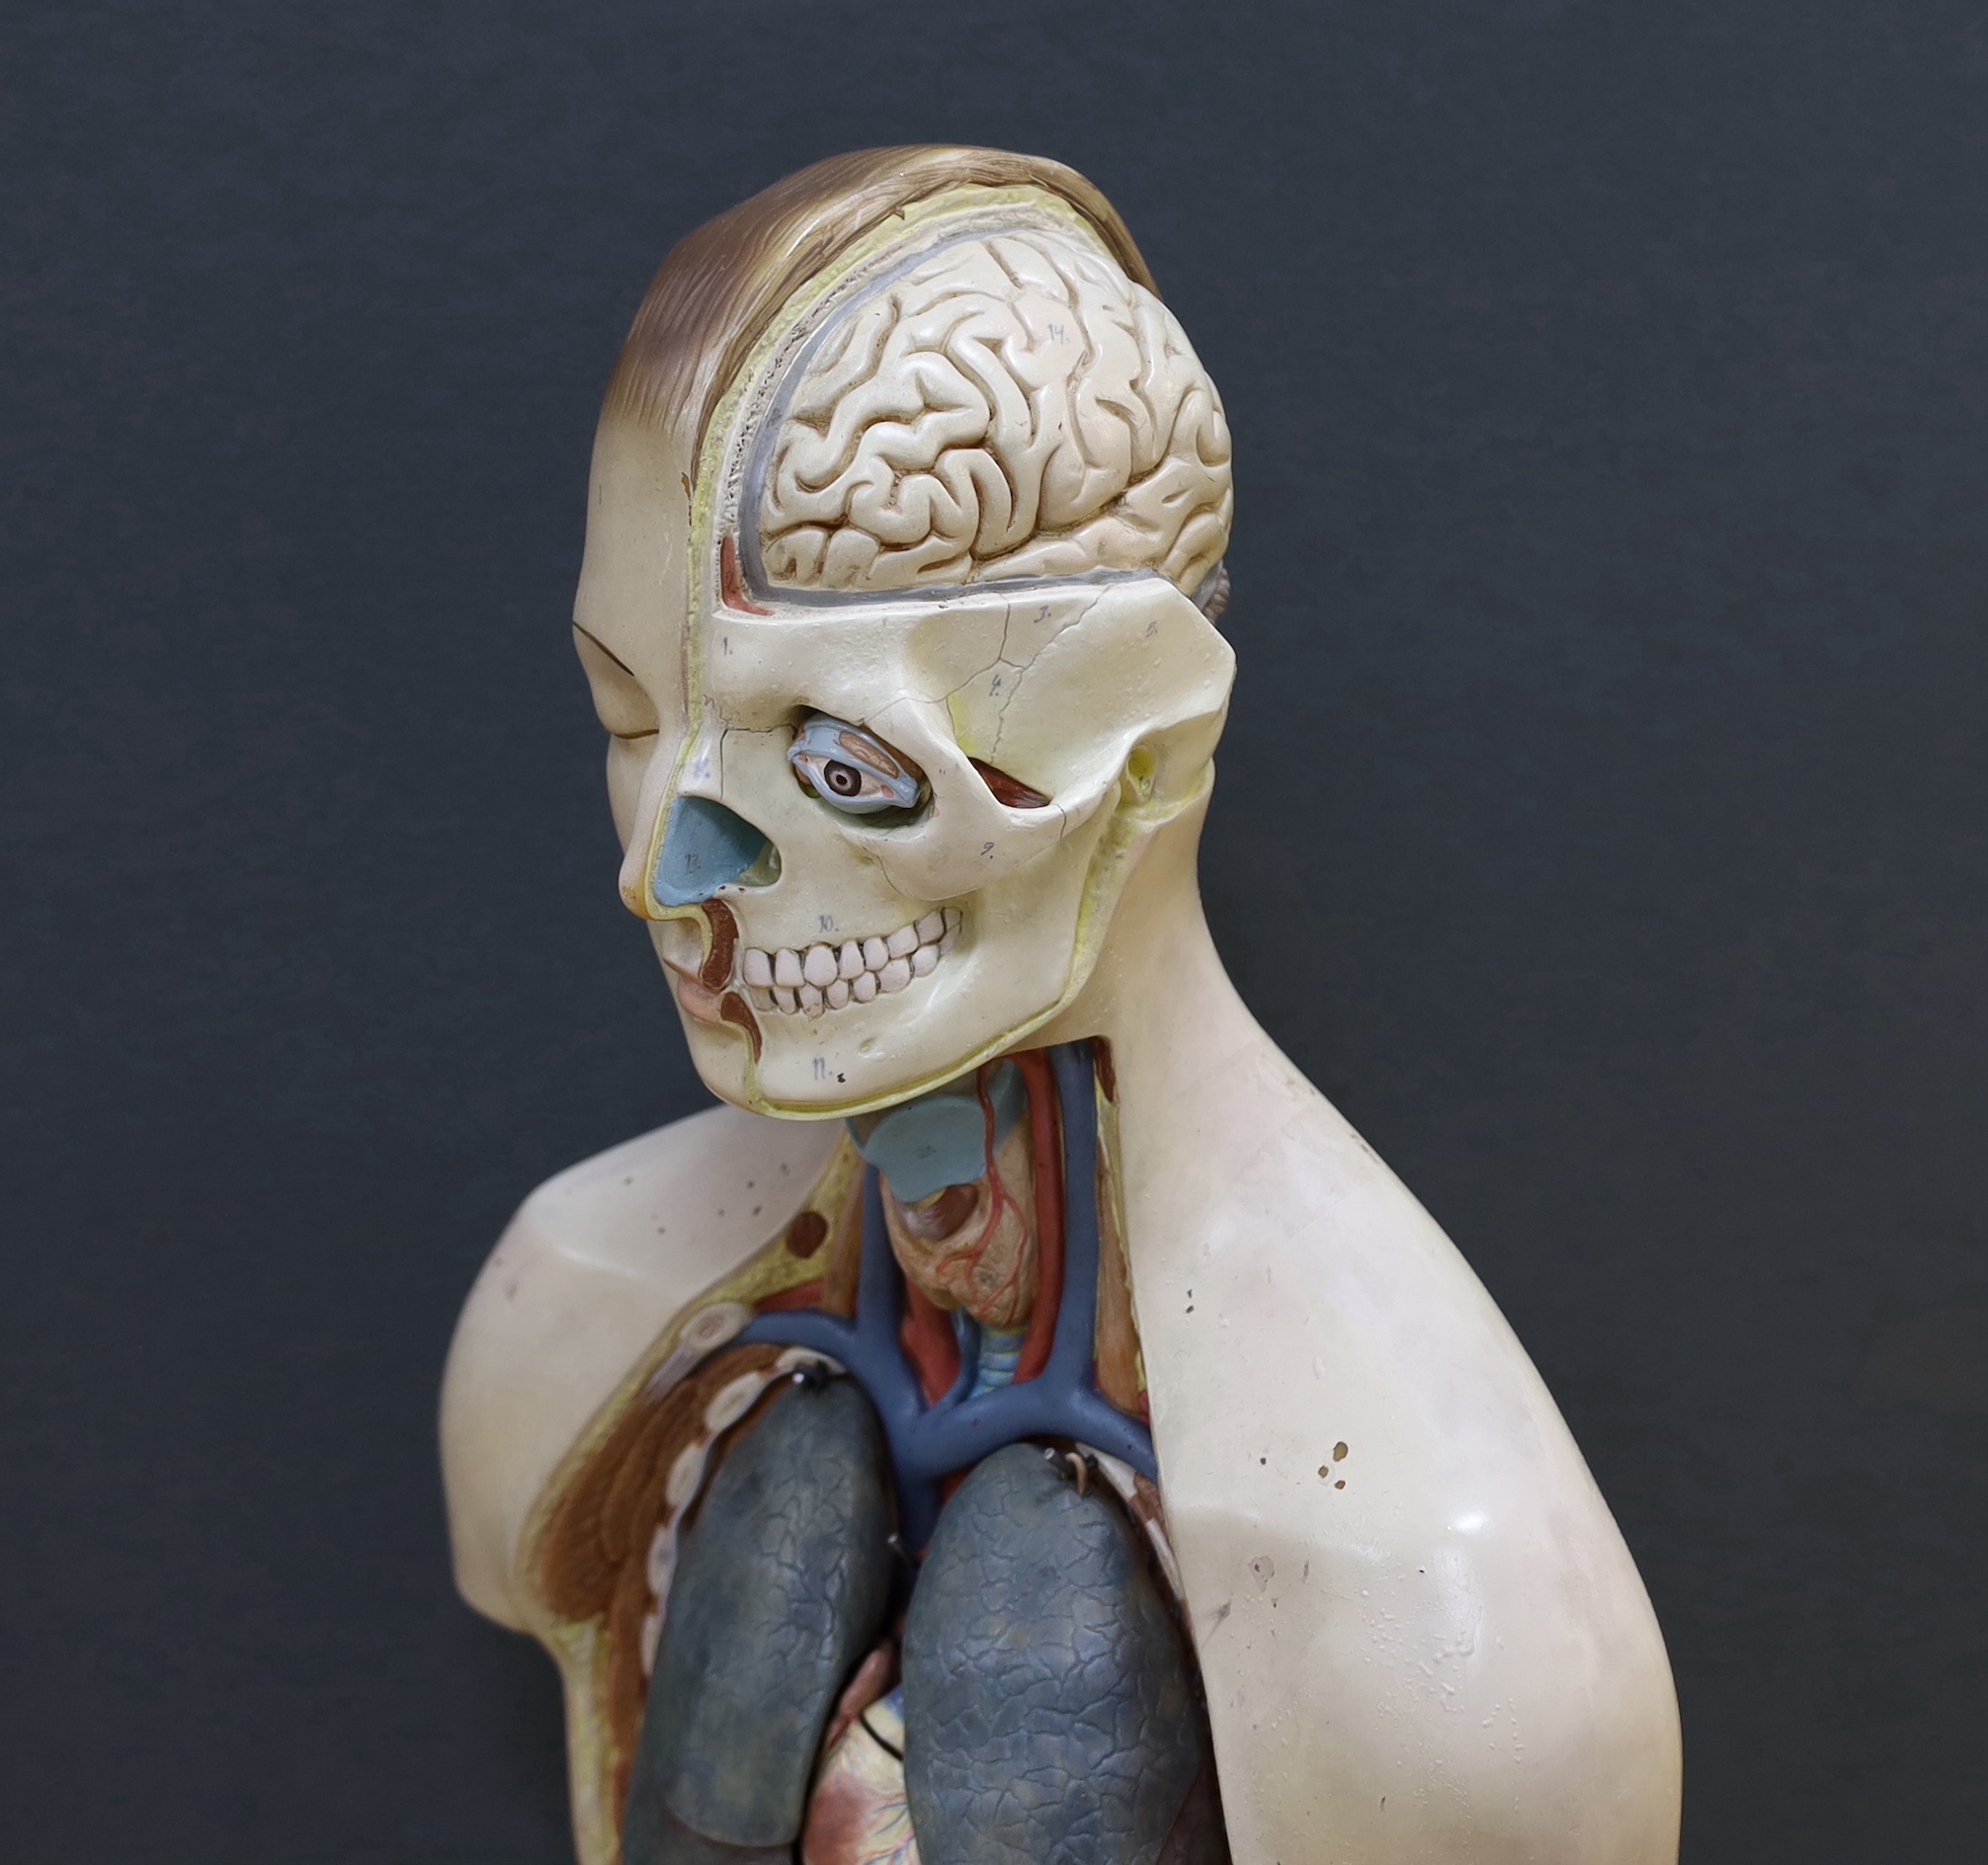 A 1950s/60s medical school educational plastic and painted composite anatomical model on base by E. - Image 2 of 4